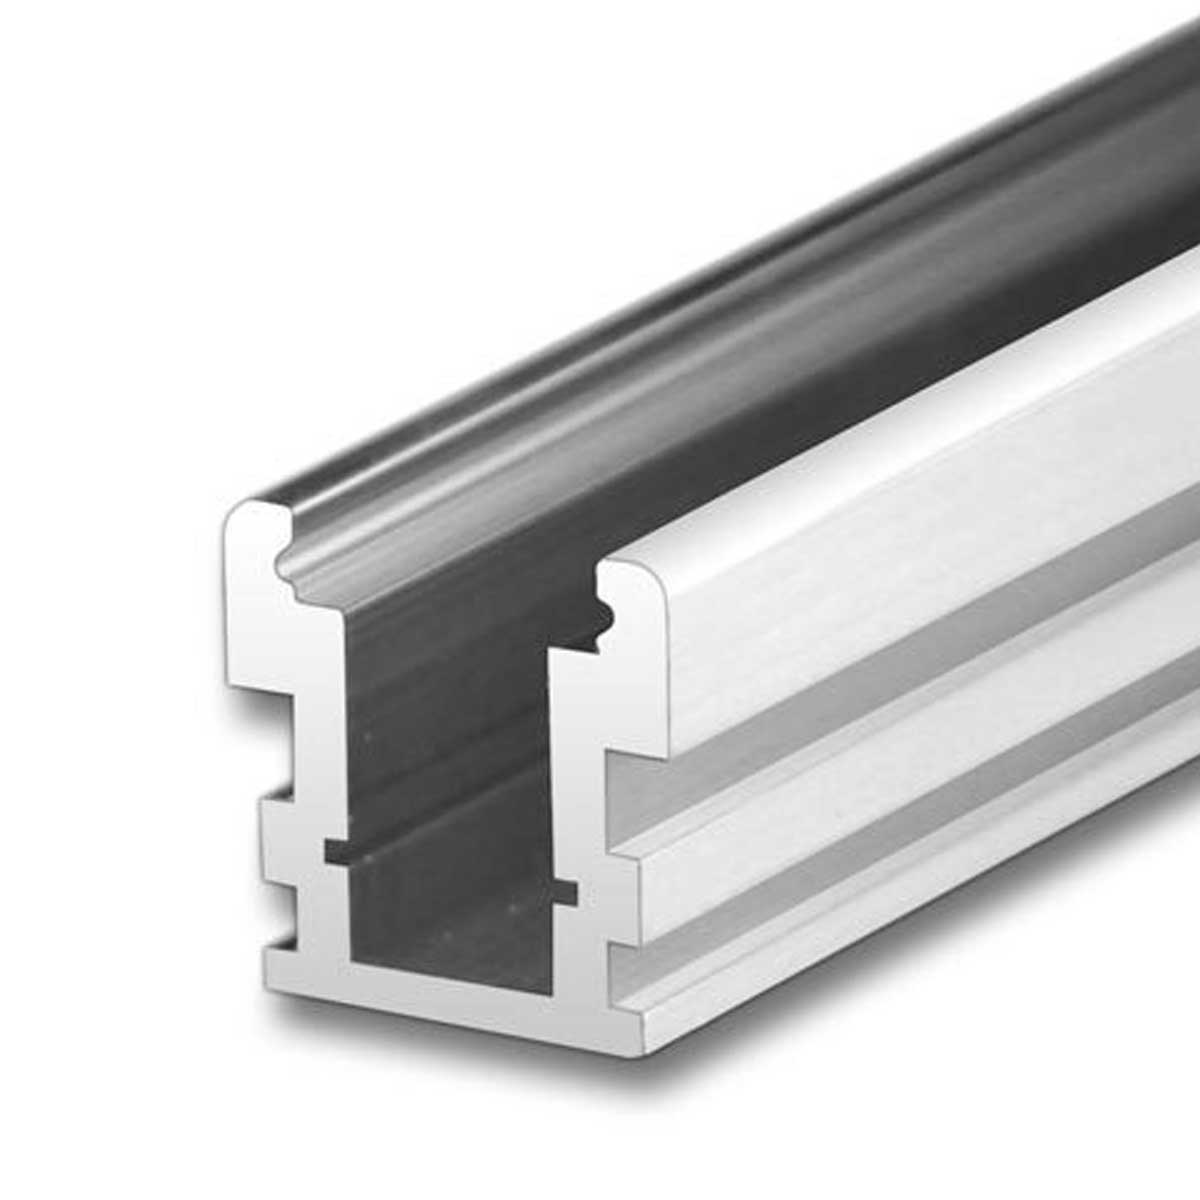 1000 Aluminium Slotted Channel Manufacturers, Suppliers in Bhuj